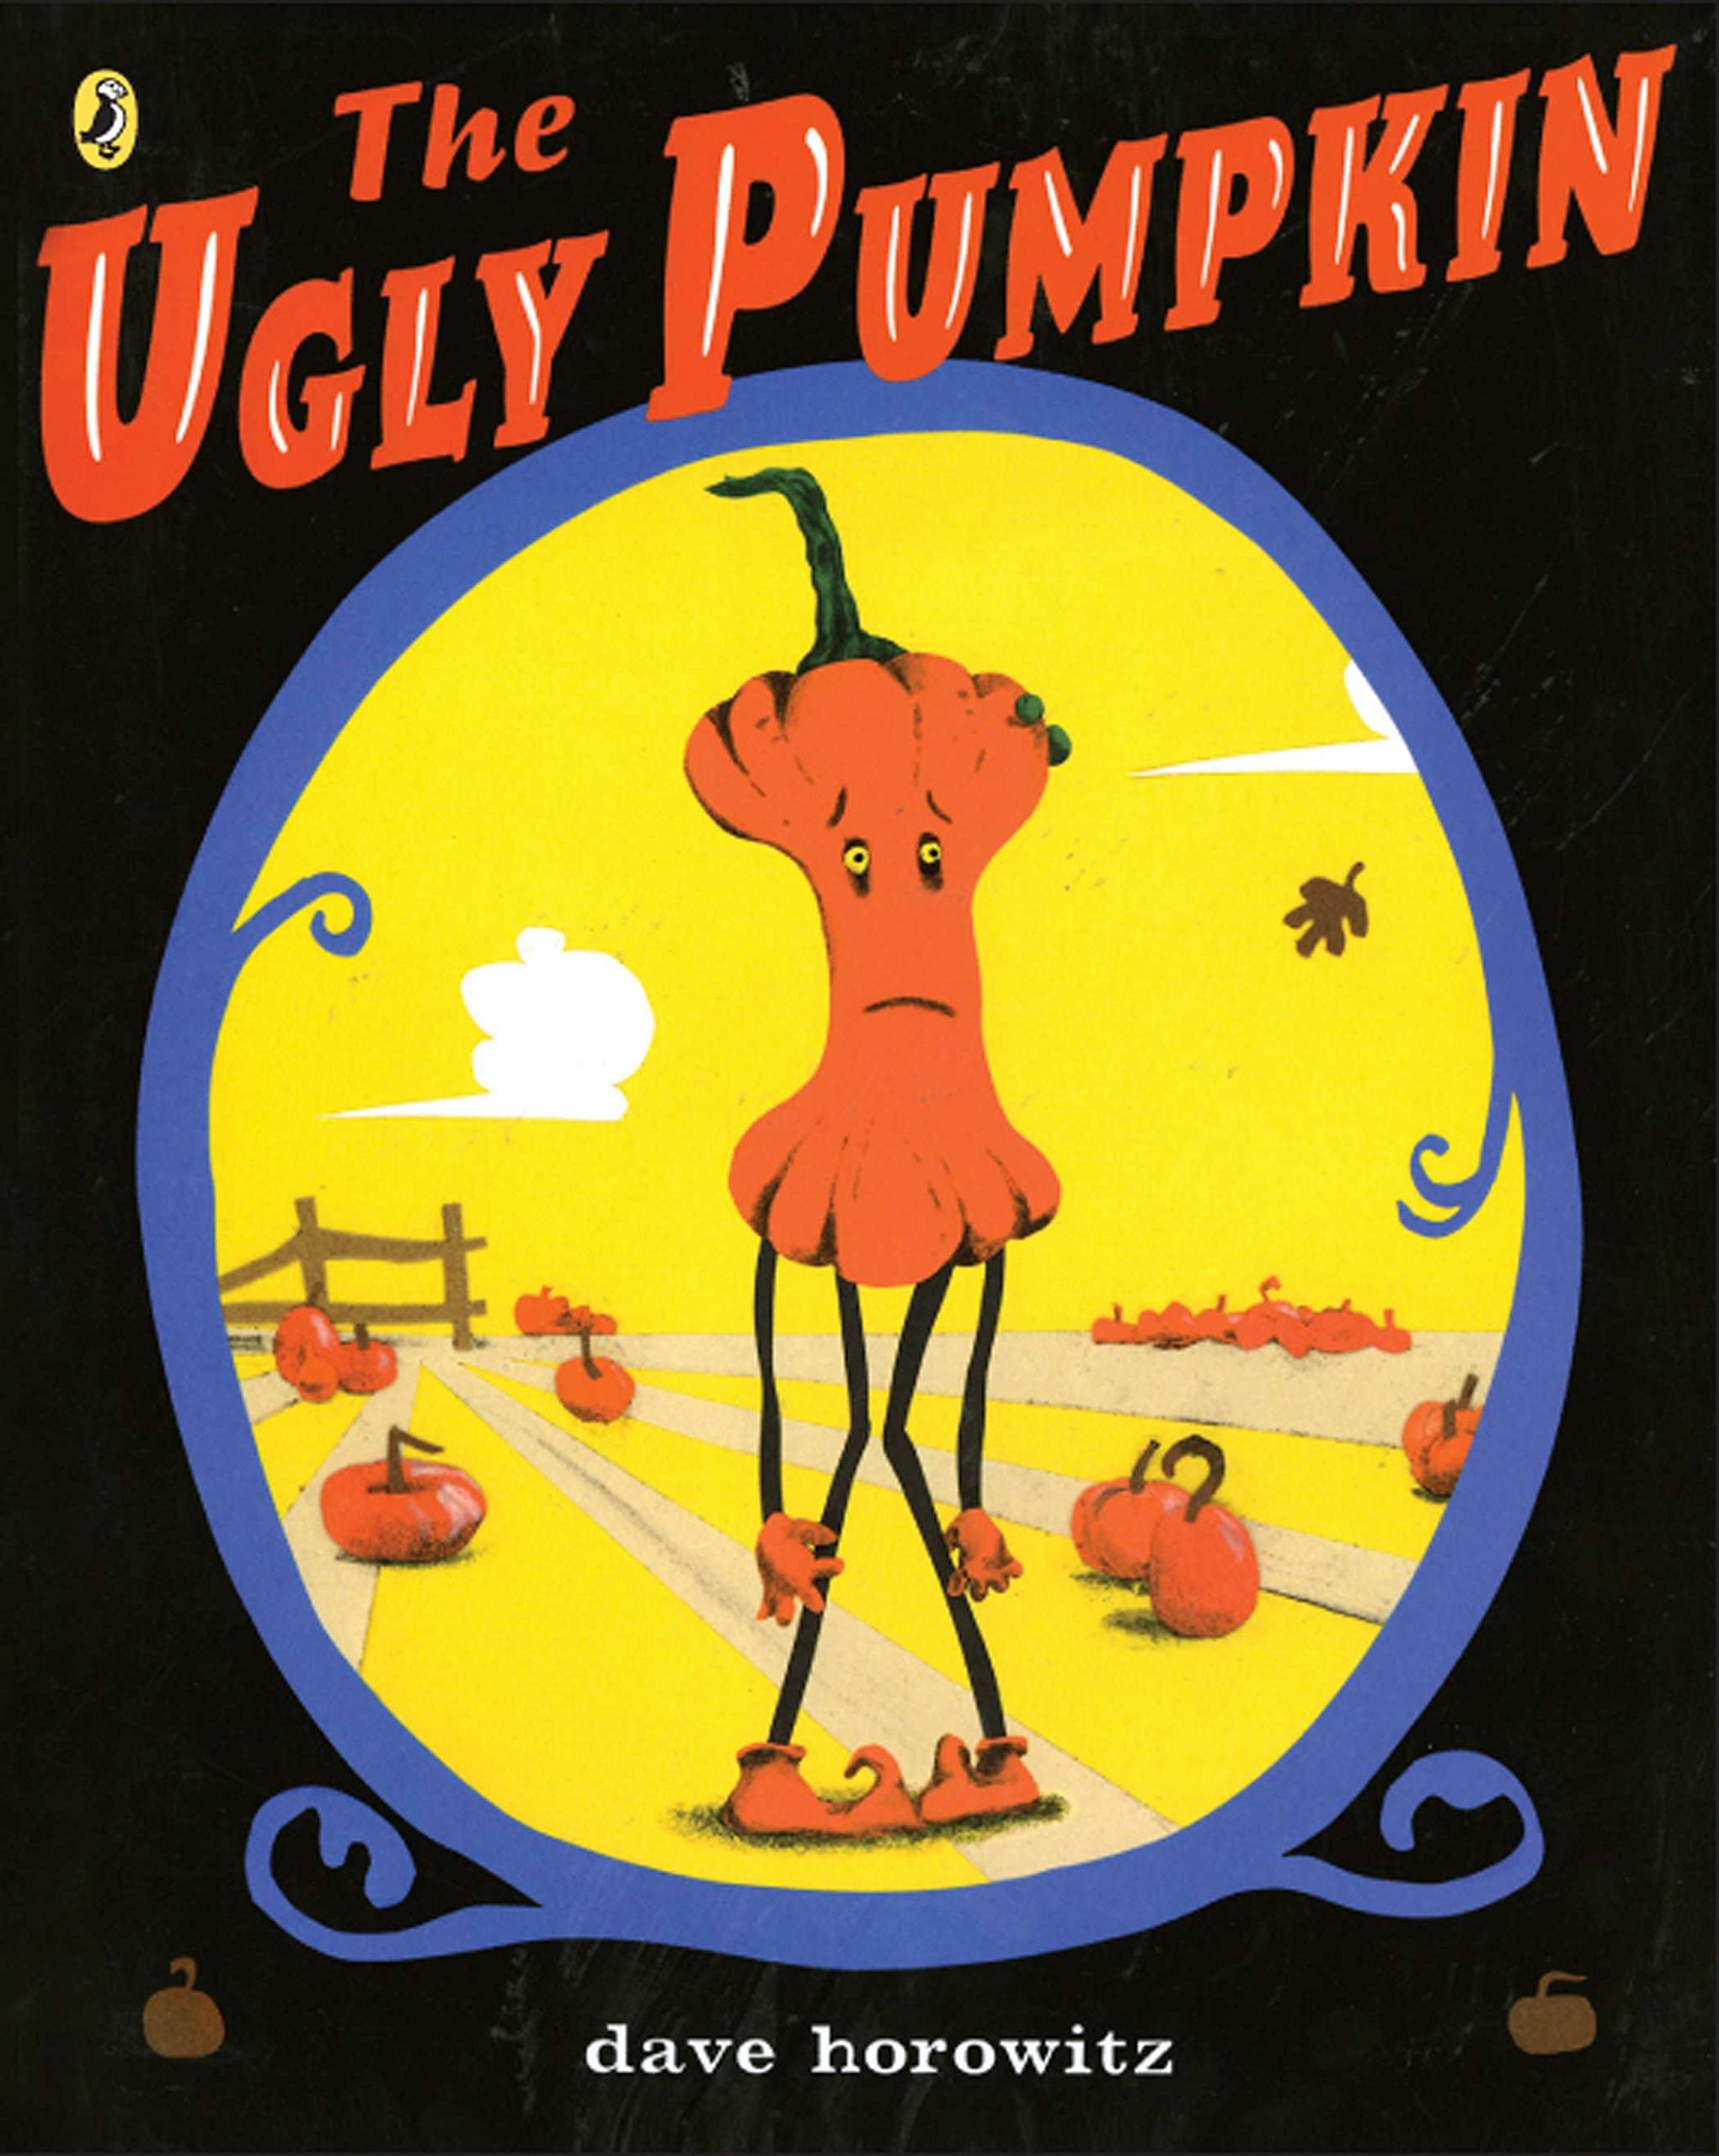 speech and language teaching concepts for the ugly pumpkin in speech therapy